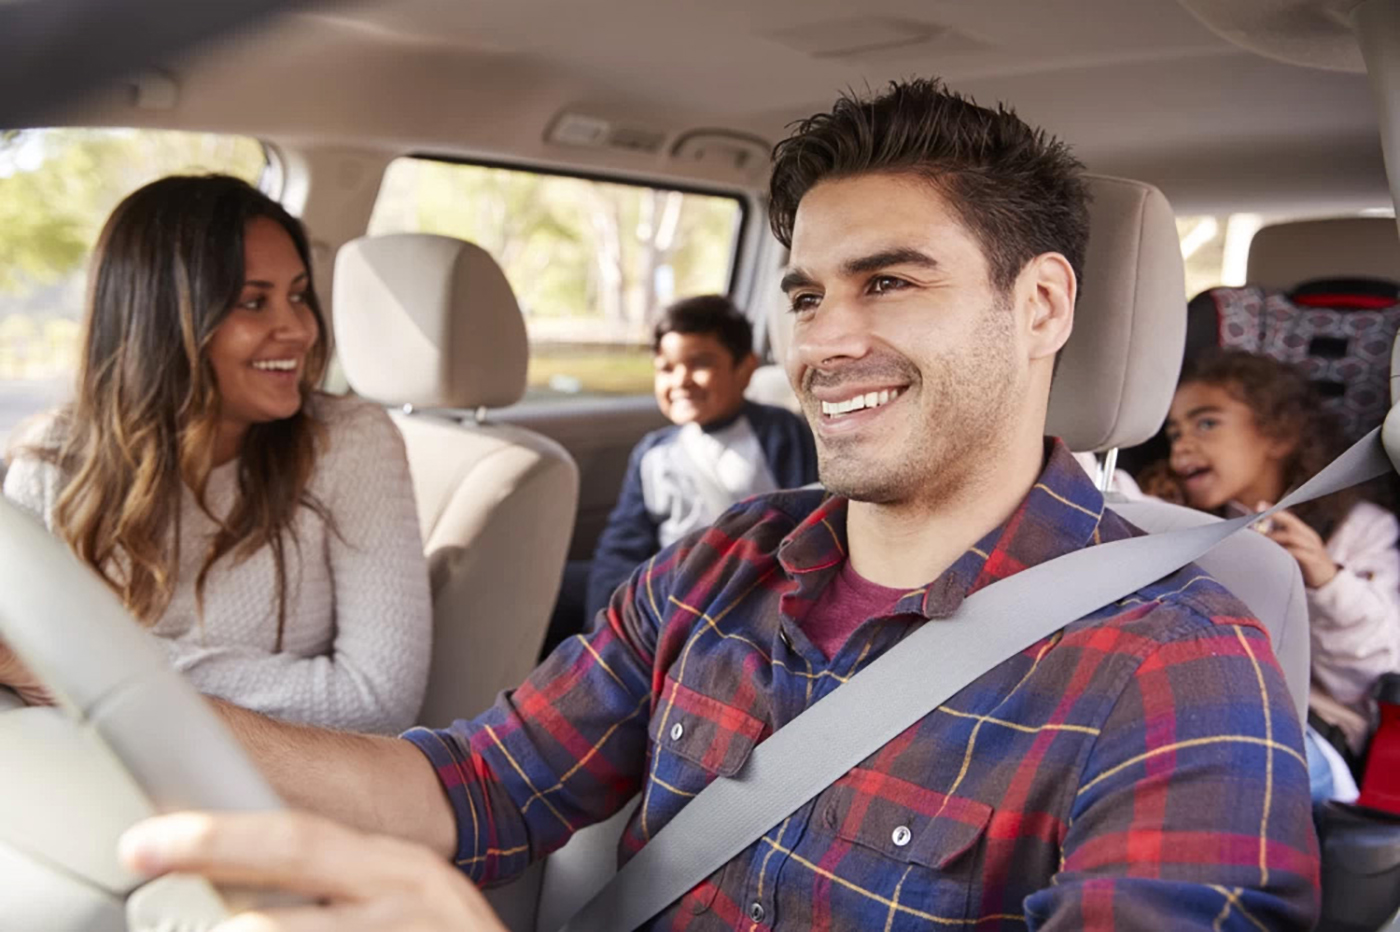 Dad with brown hair wearing a blue and red plaid shirt, mom wearing a white long-sleeve shirt in the front seat of a car wearing seatbelts and two kids in the back seat wearing seatbelts.